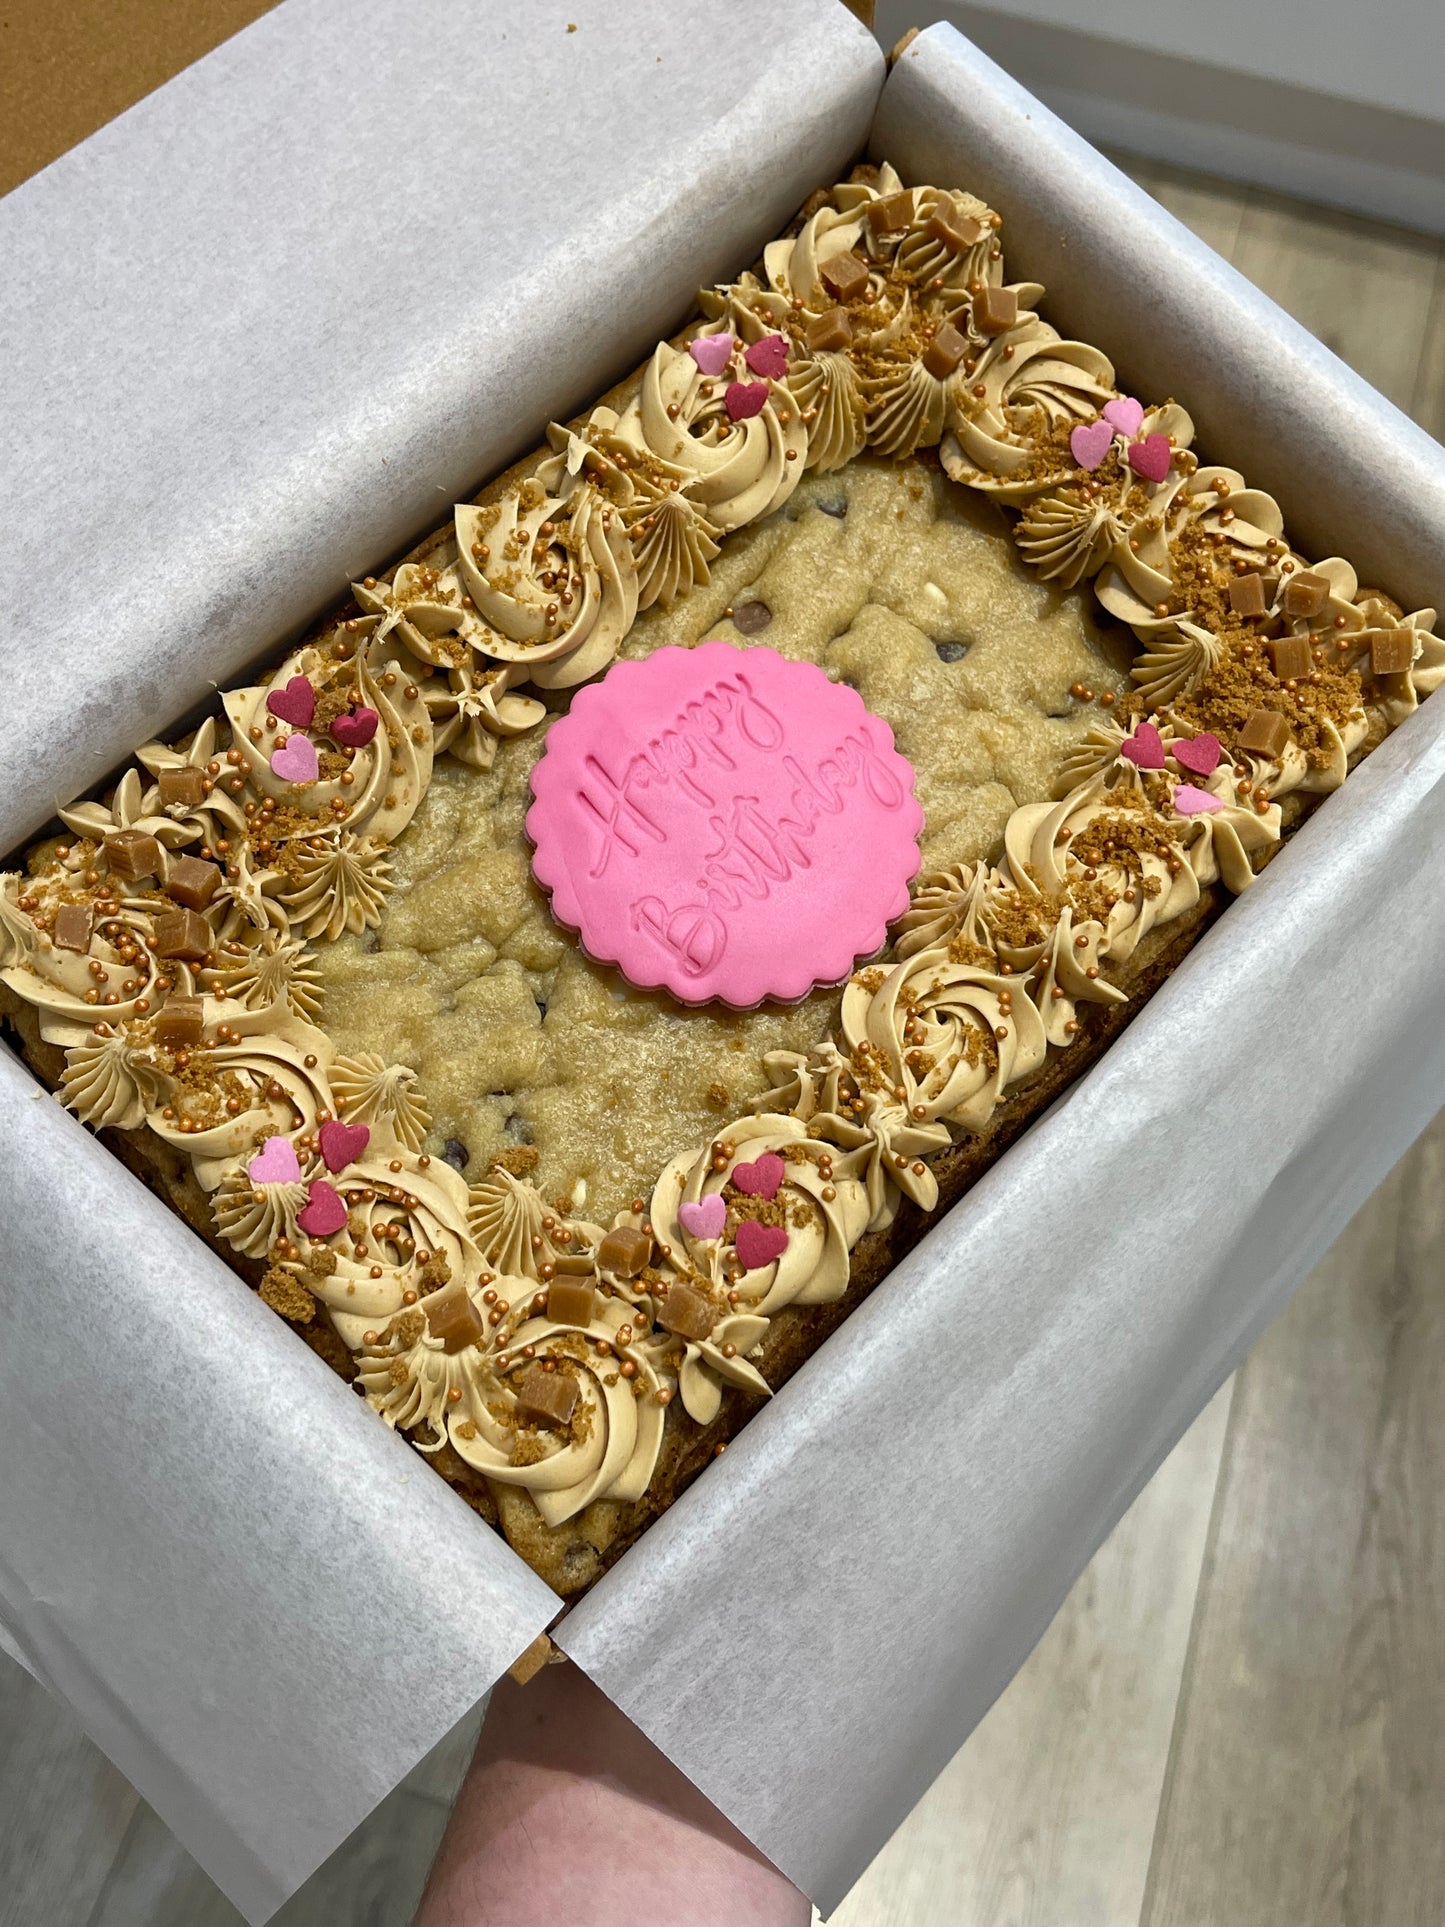 Small Cookie Cake 9" x  6"